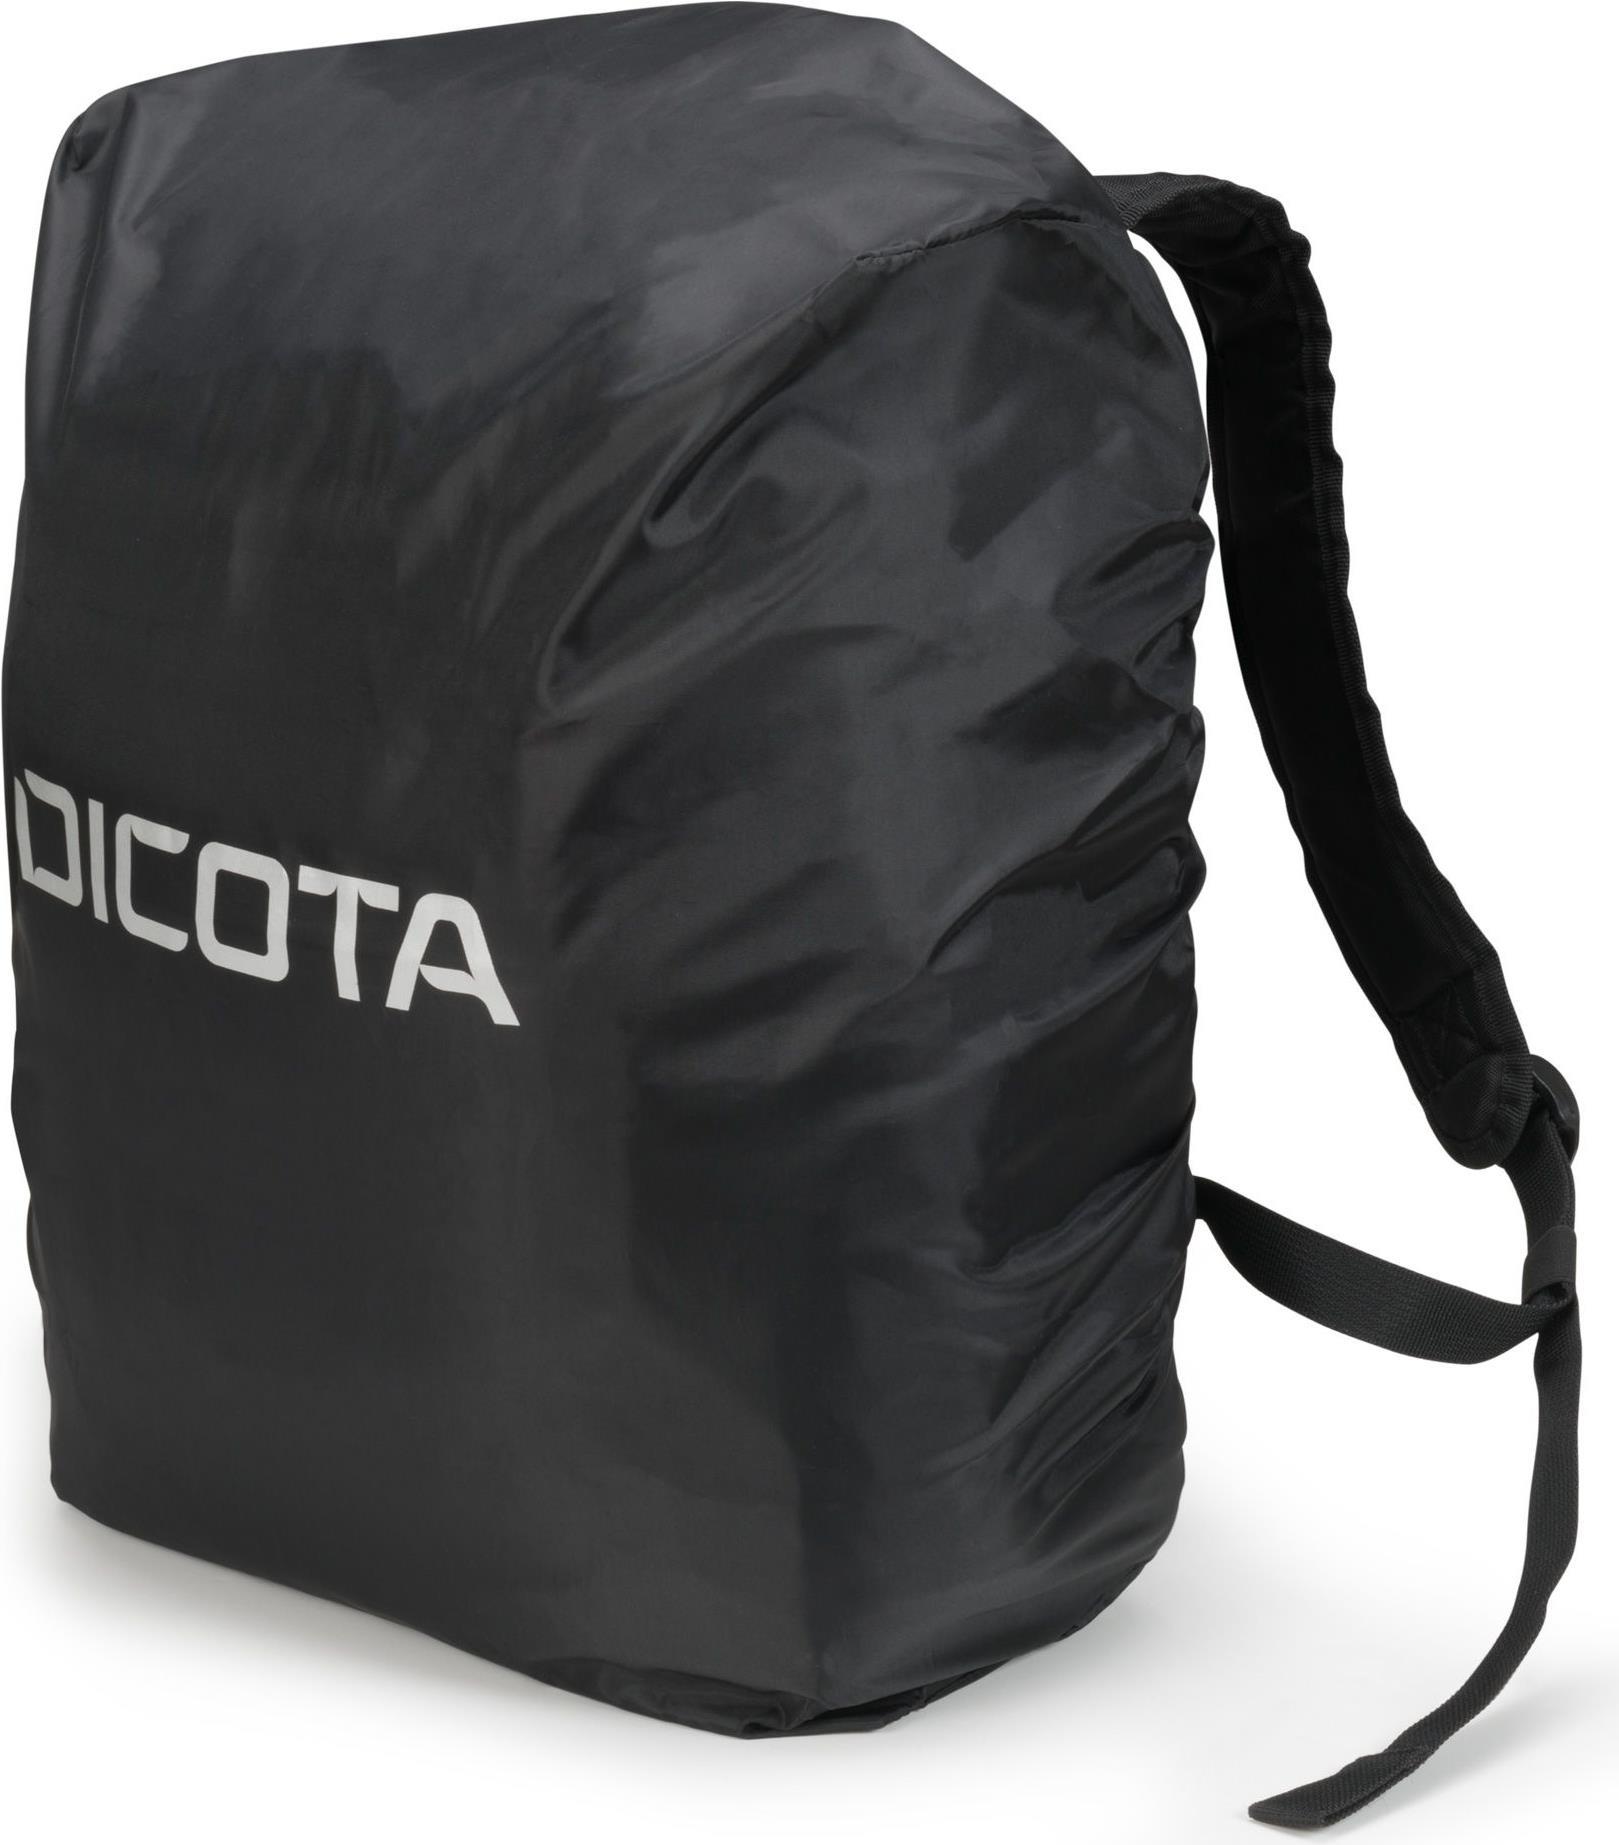 DICOTA Backpack Plus Spin (D31736)